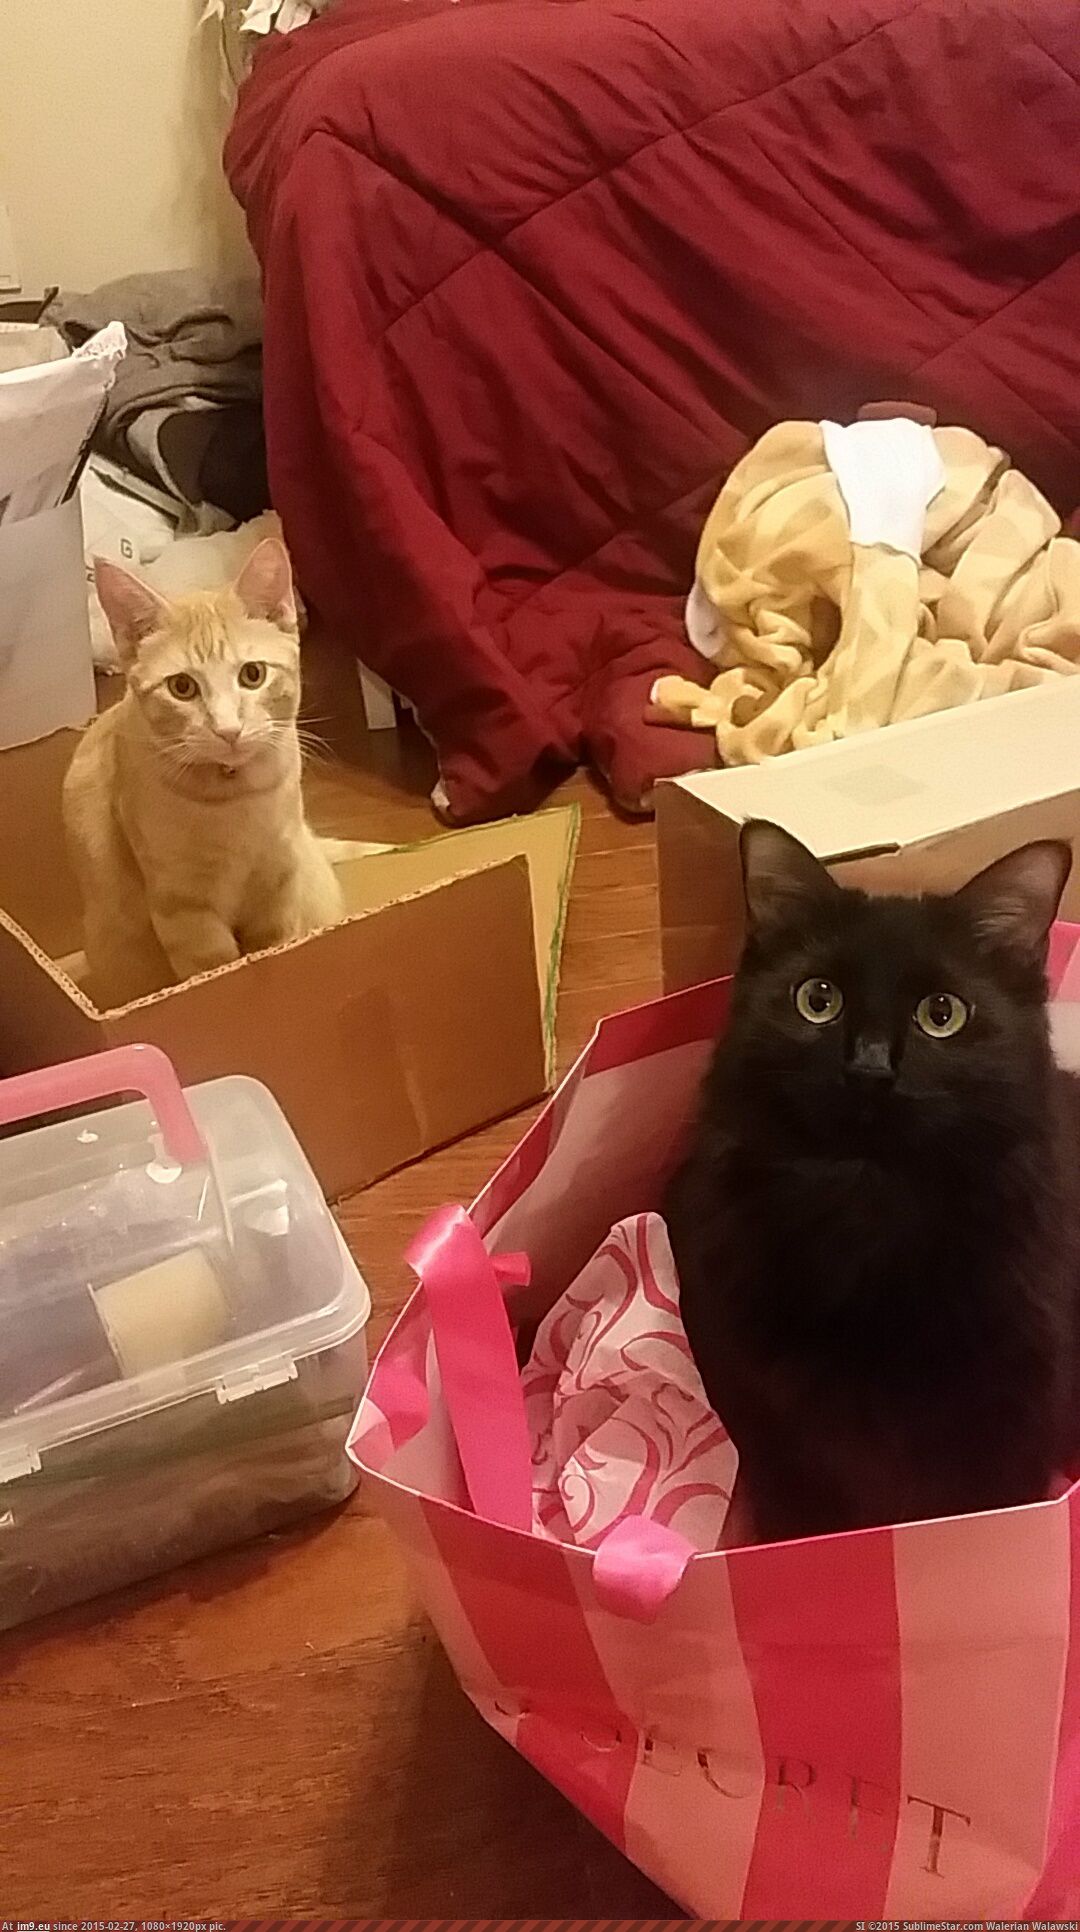 [Cats] Every time I get a box or shopping bag they just jump right in (in My r/CATS favs)